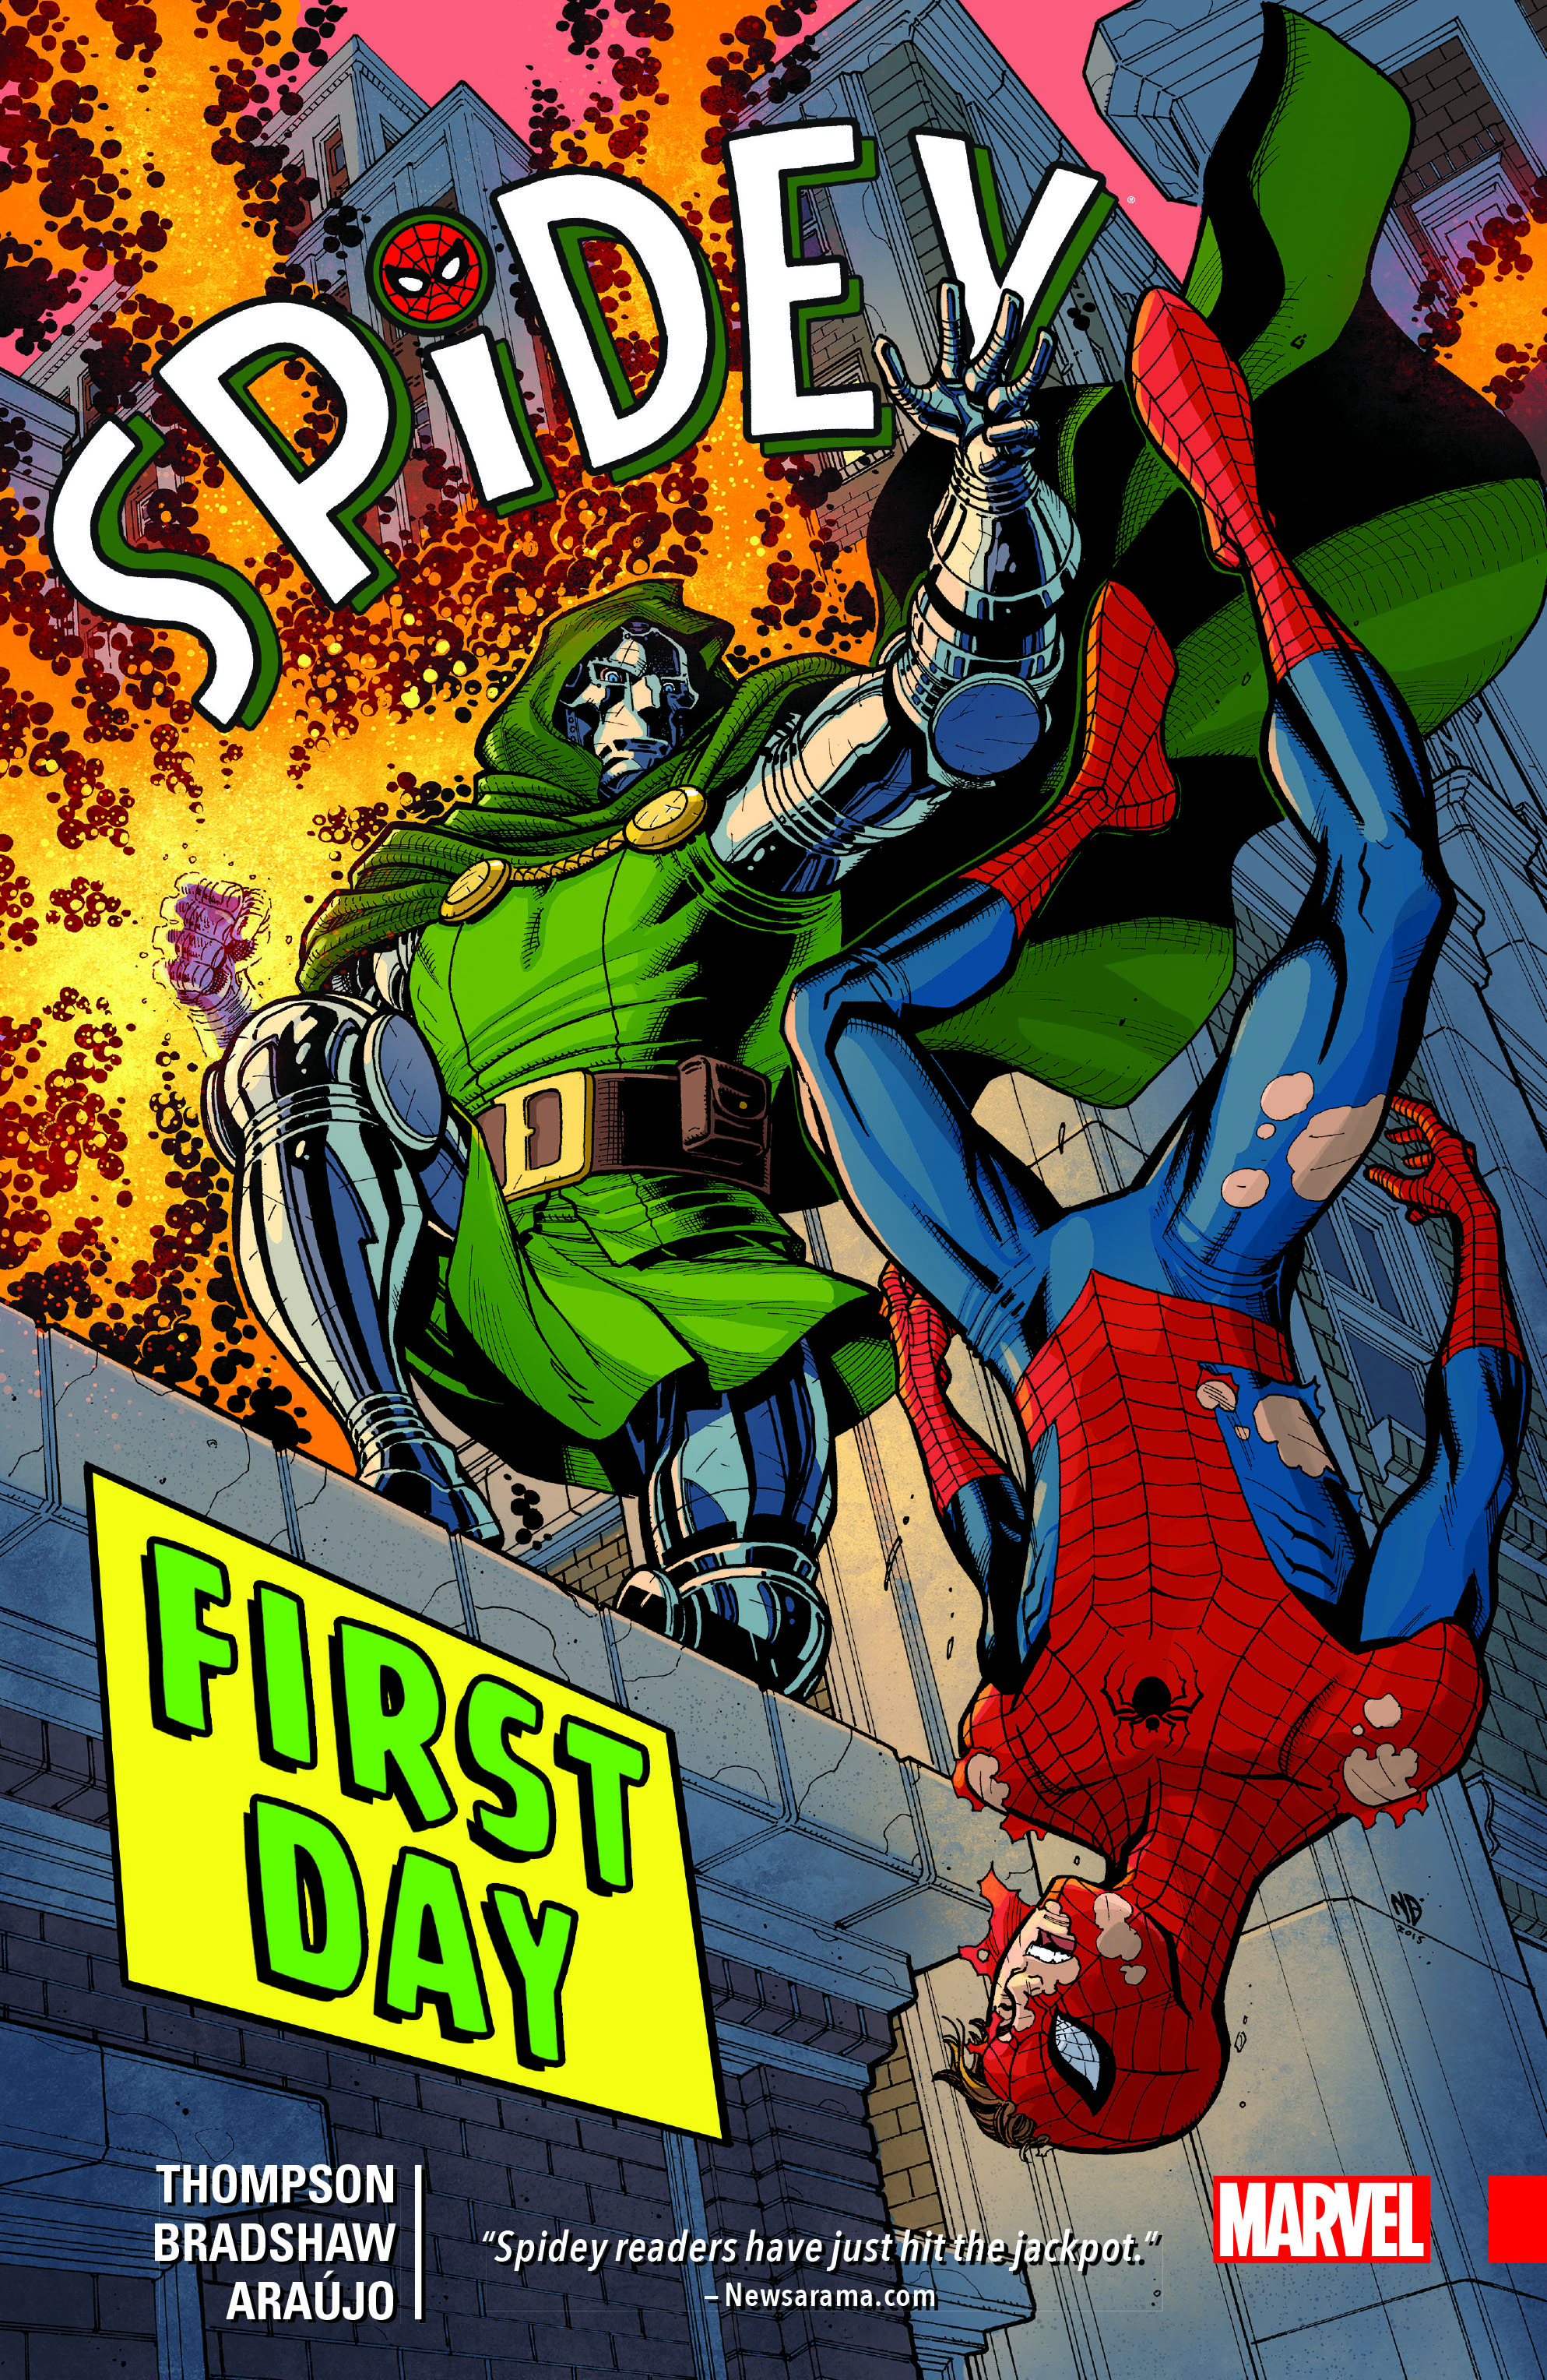 Spidey Vol. 1: First Day (Trade Paperback)